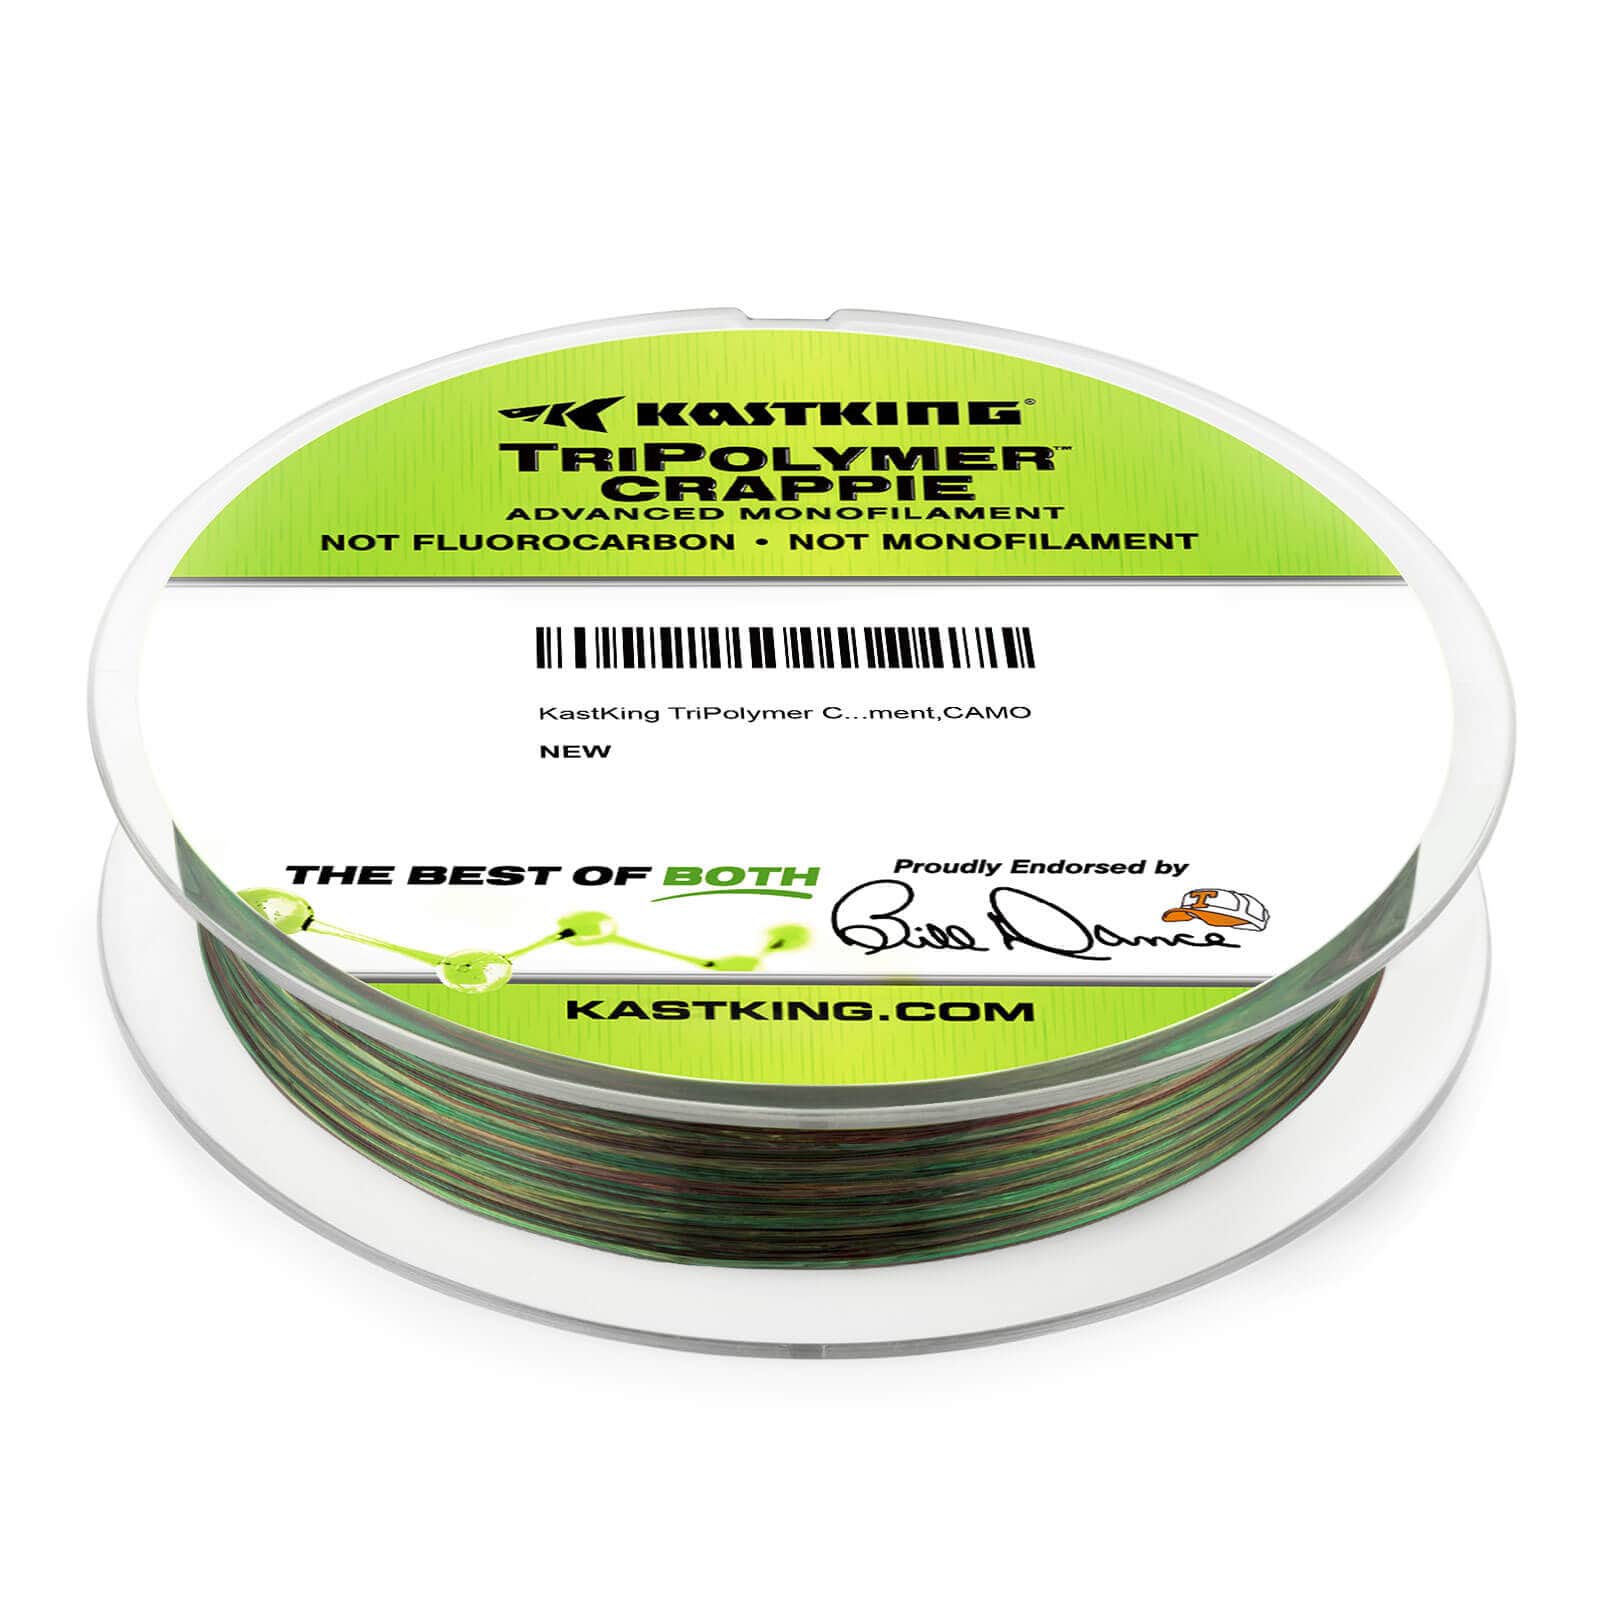 KastKing World's Premium Monofilament Fishing Line - Paralleled Roll Track  - Strong and Abrasion Resistant Mono Line - Superior Nylon Material Fishing